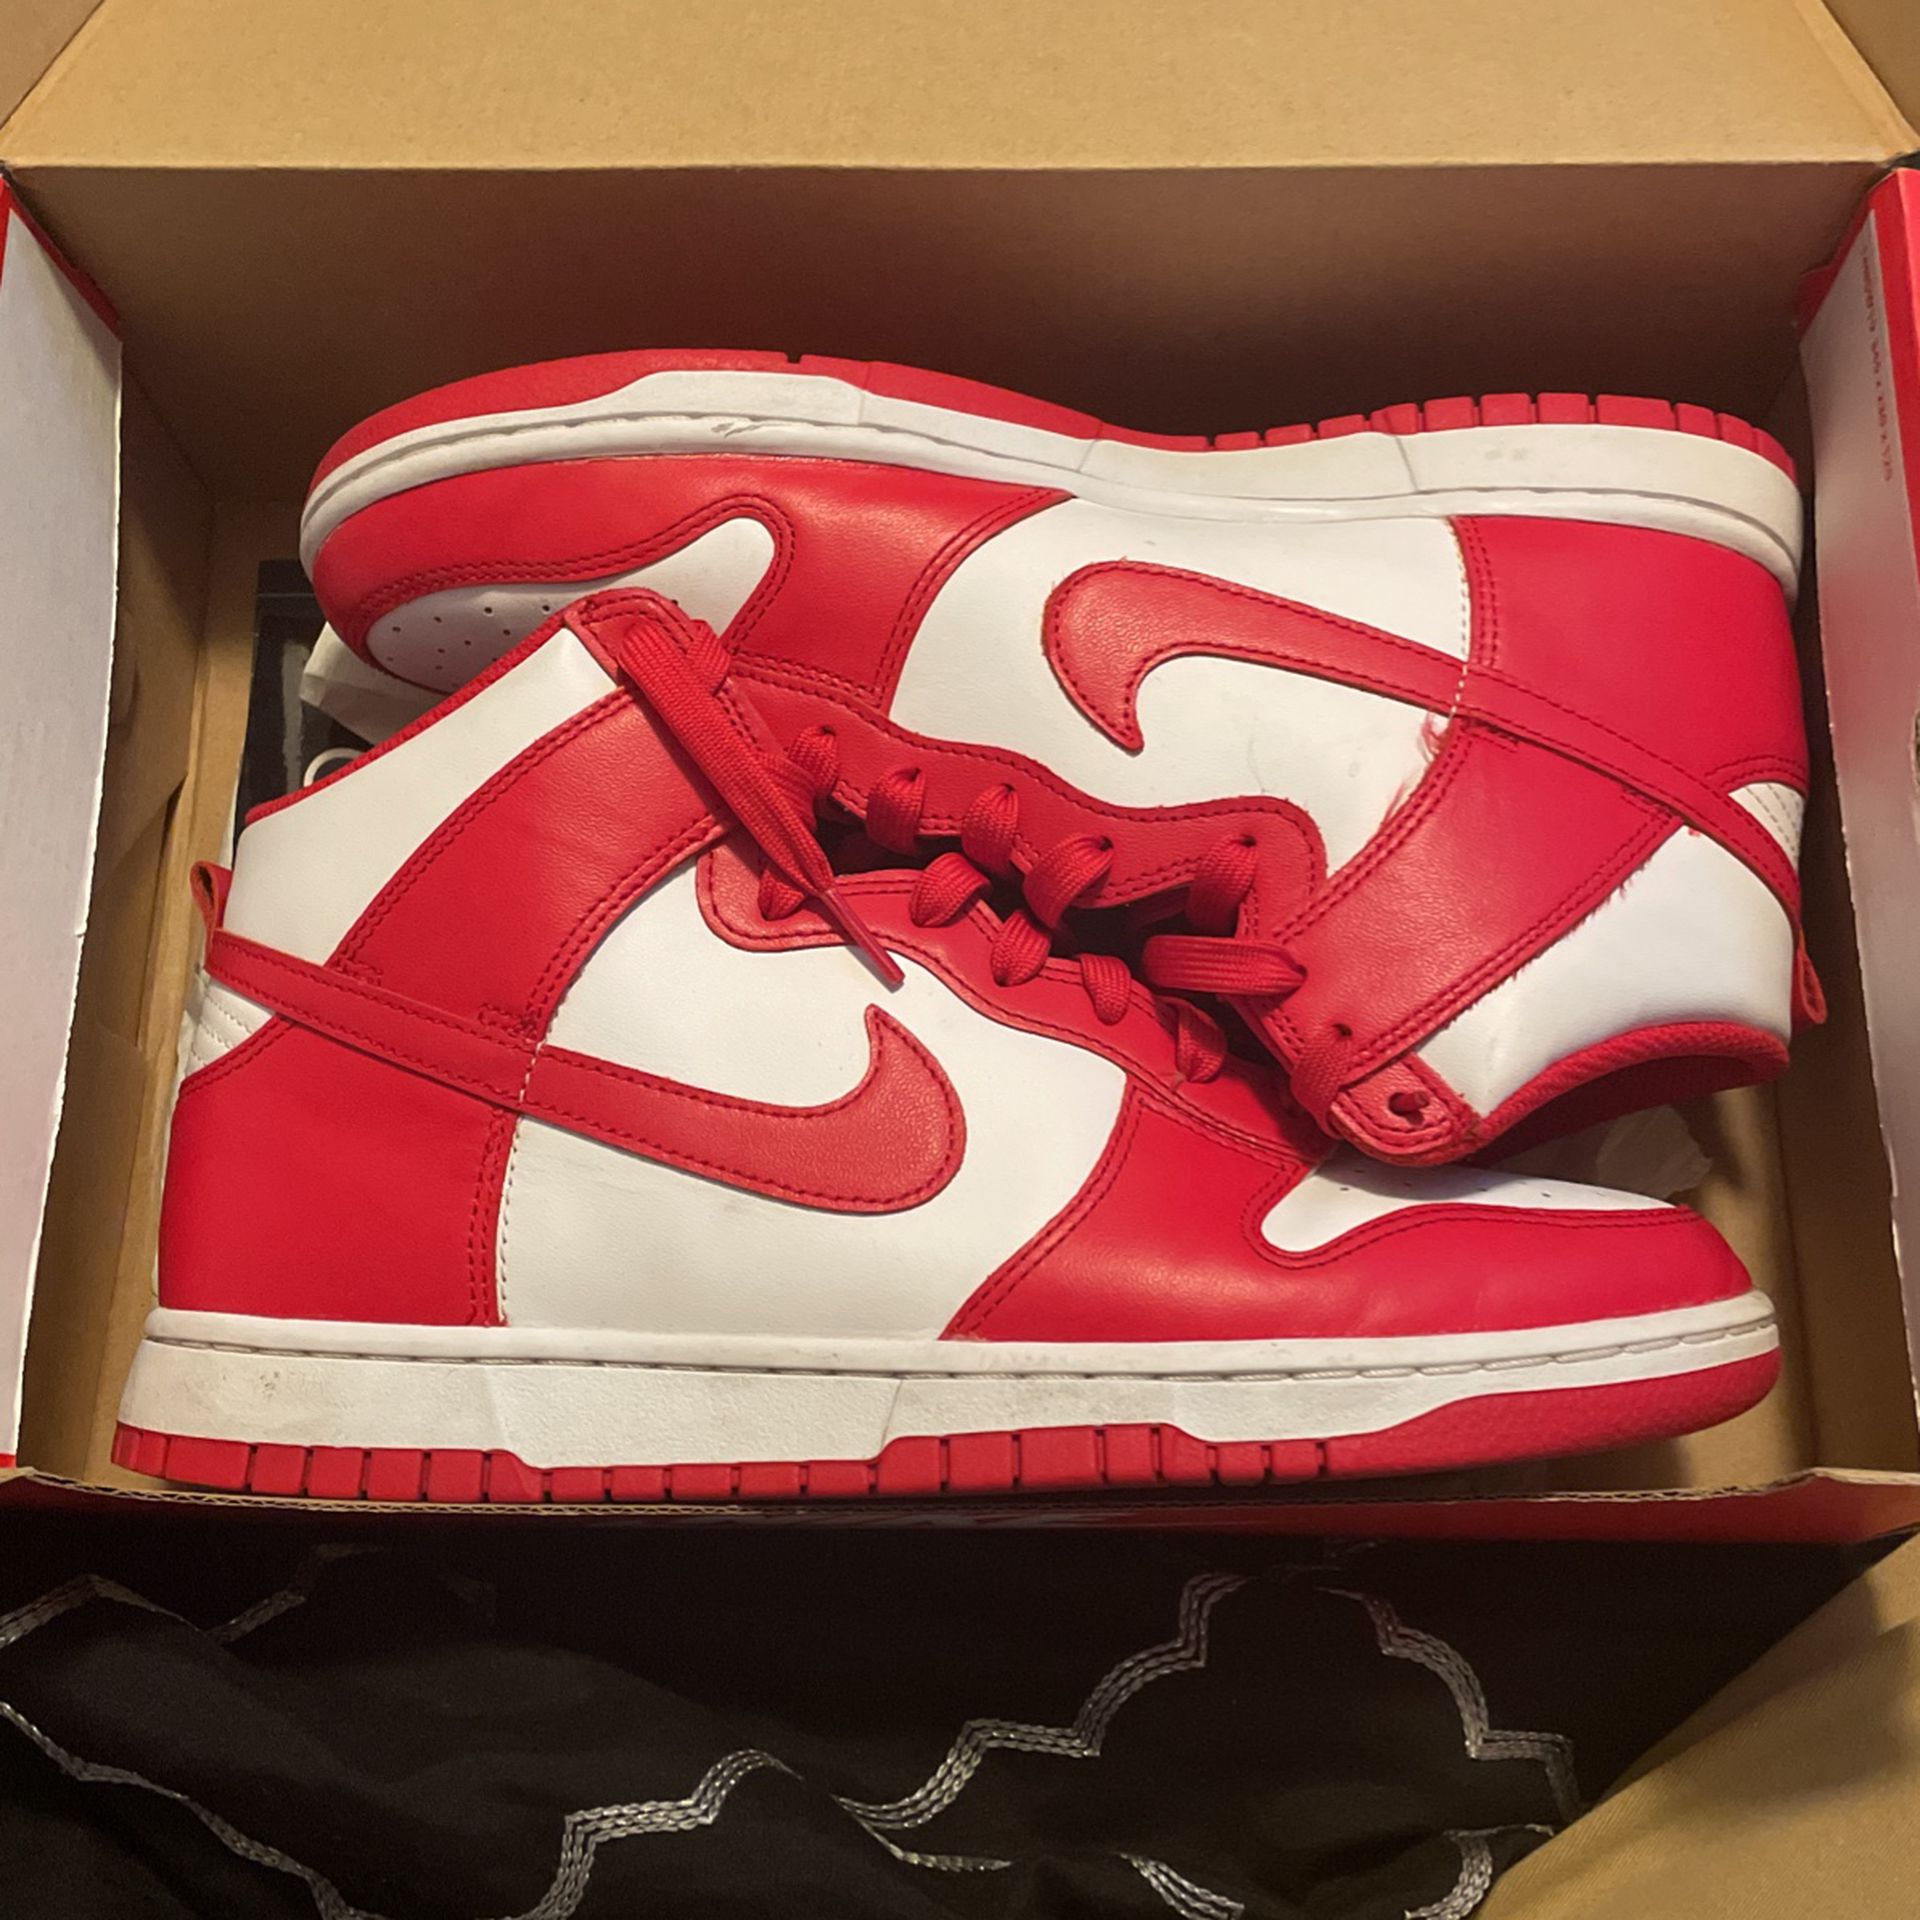 Red High Top Dunks